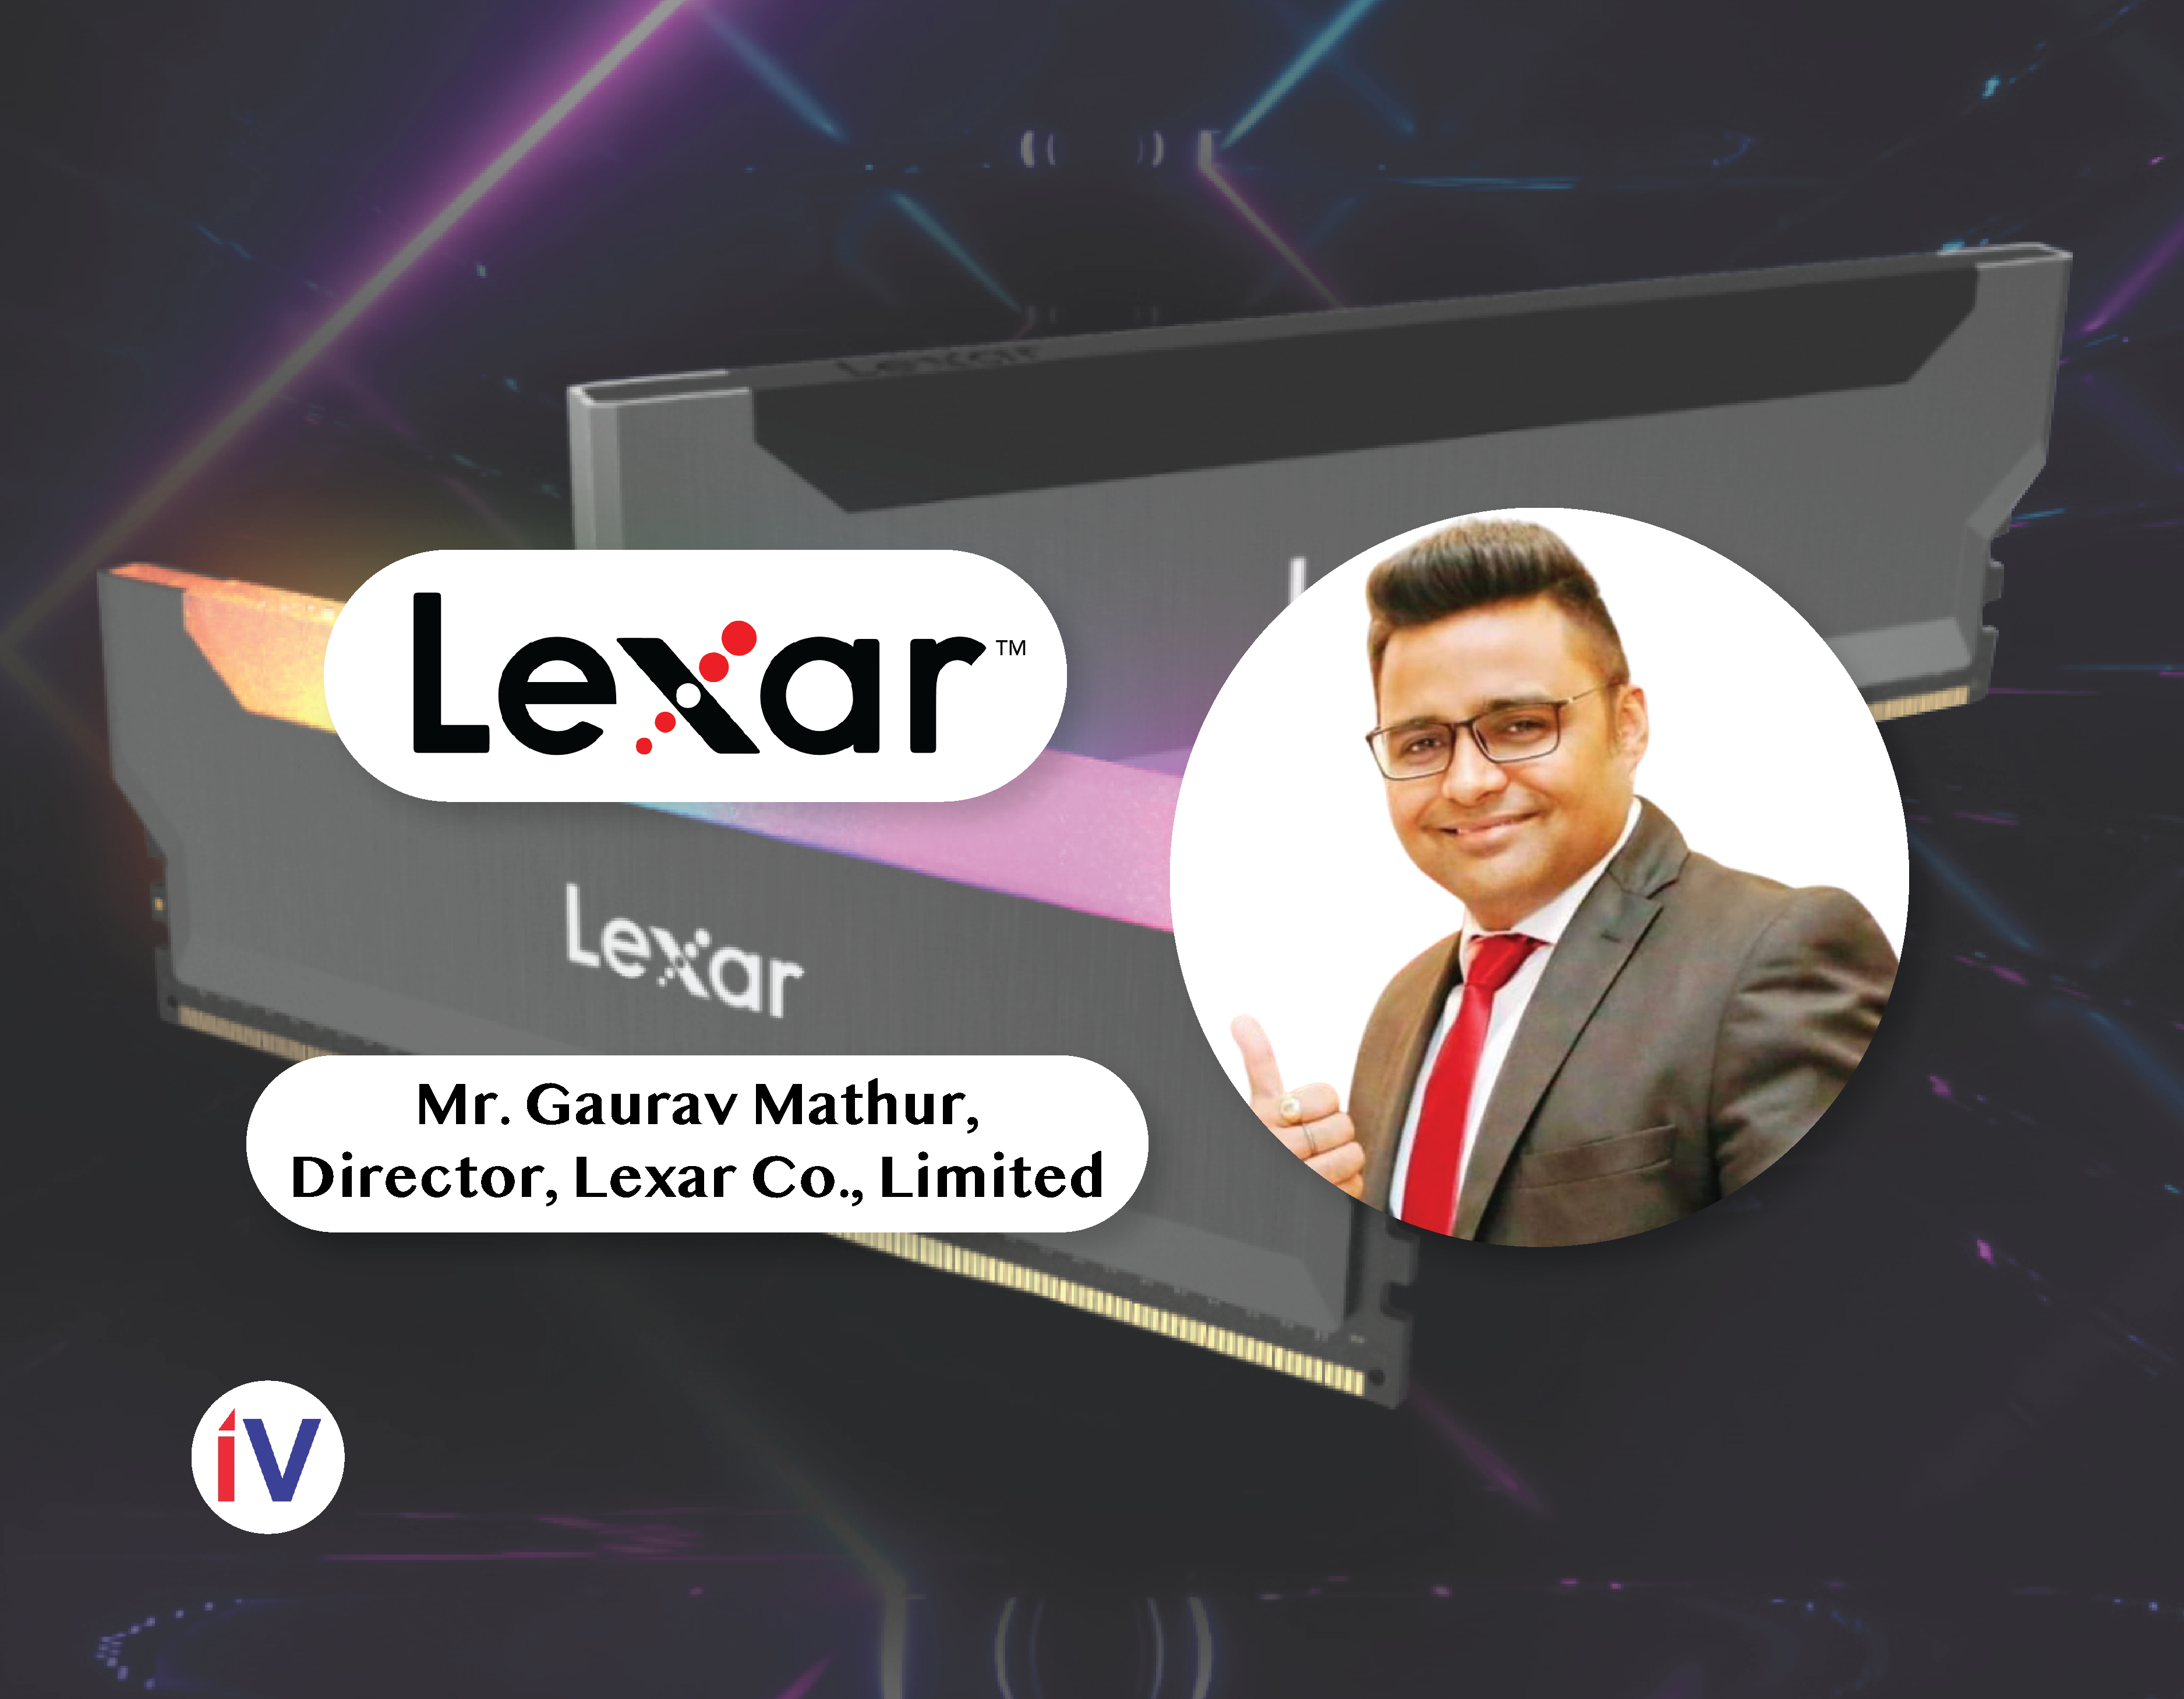 "Indian market is one of the most potential markets in terms of expected GDP growth, market size and demand for IT/Camera product." - Mr. Gaurav Mathur, Director, Lexar Co., Limited